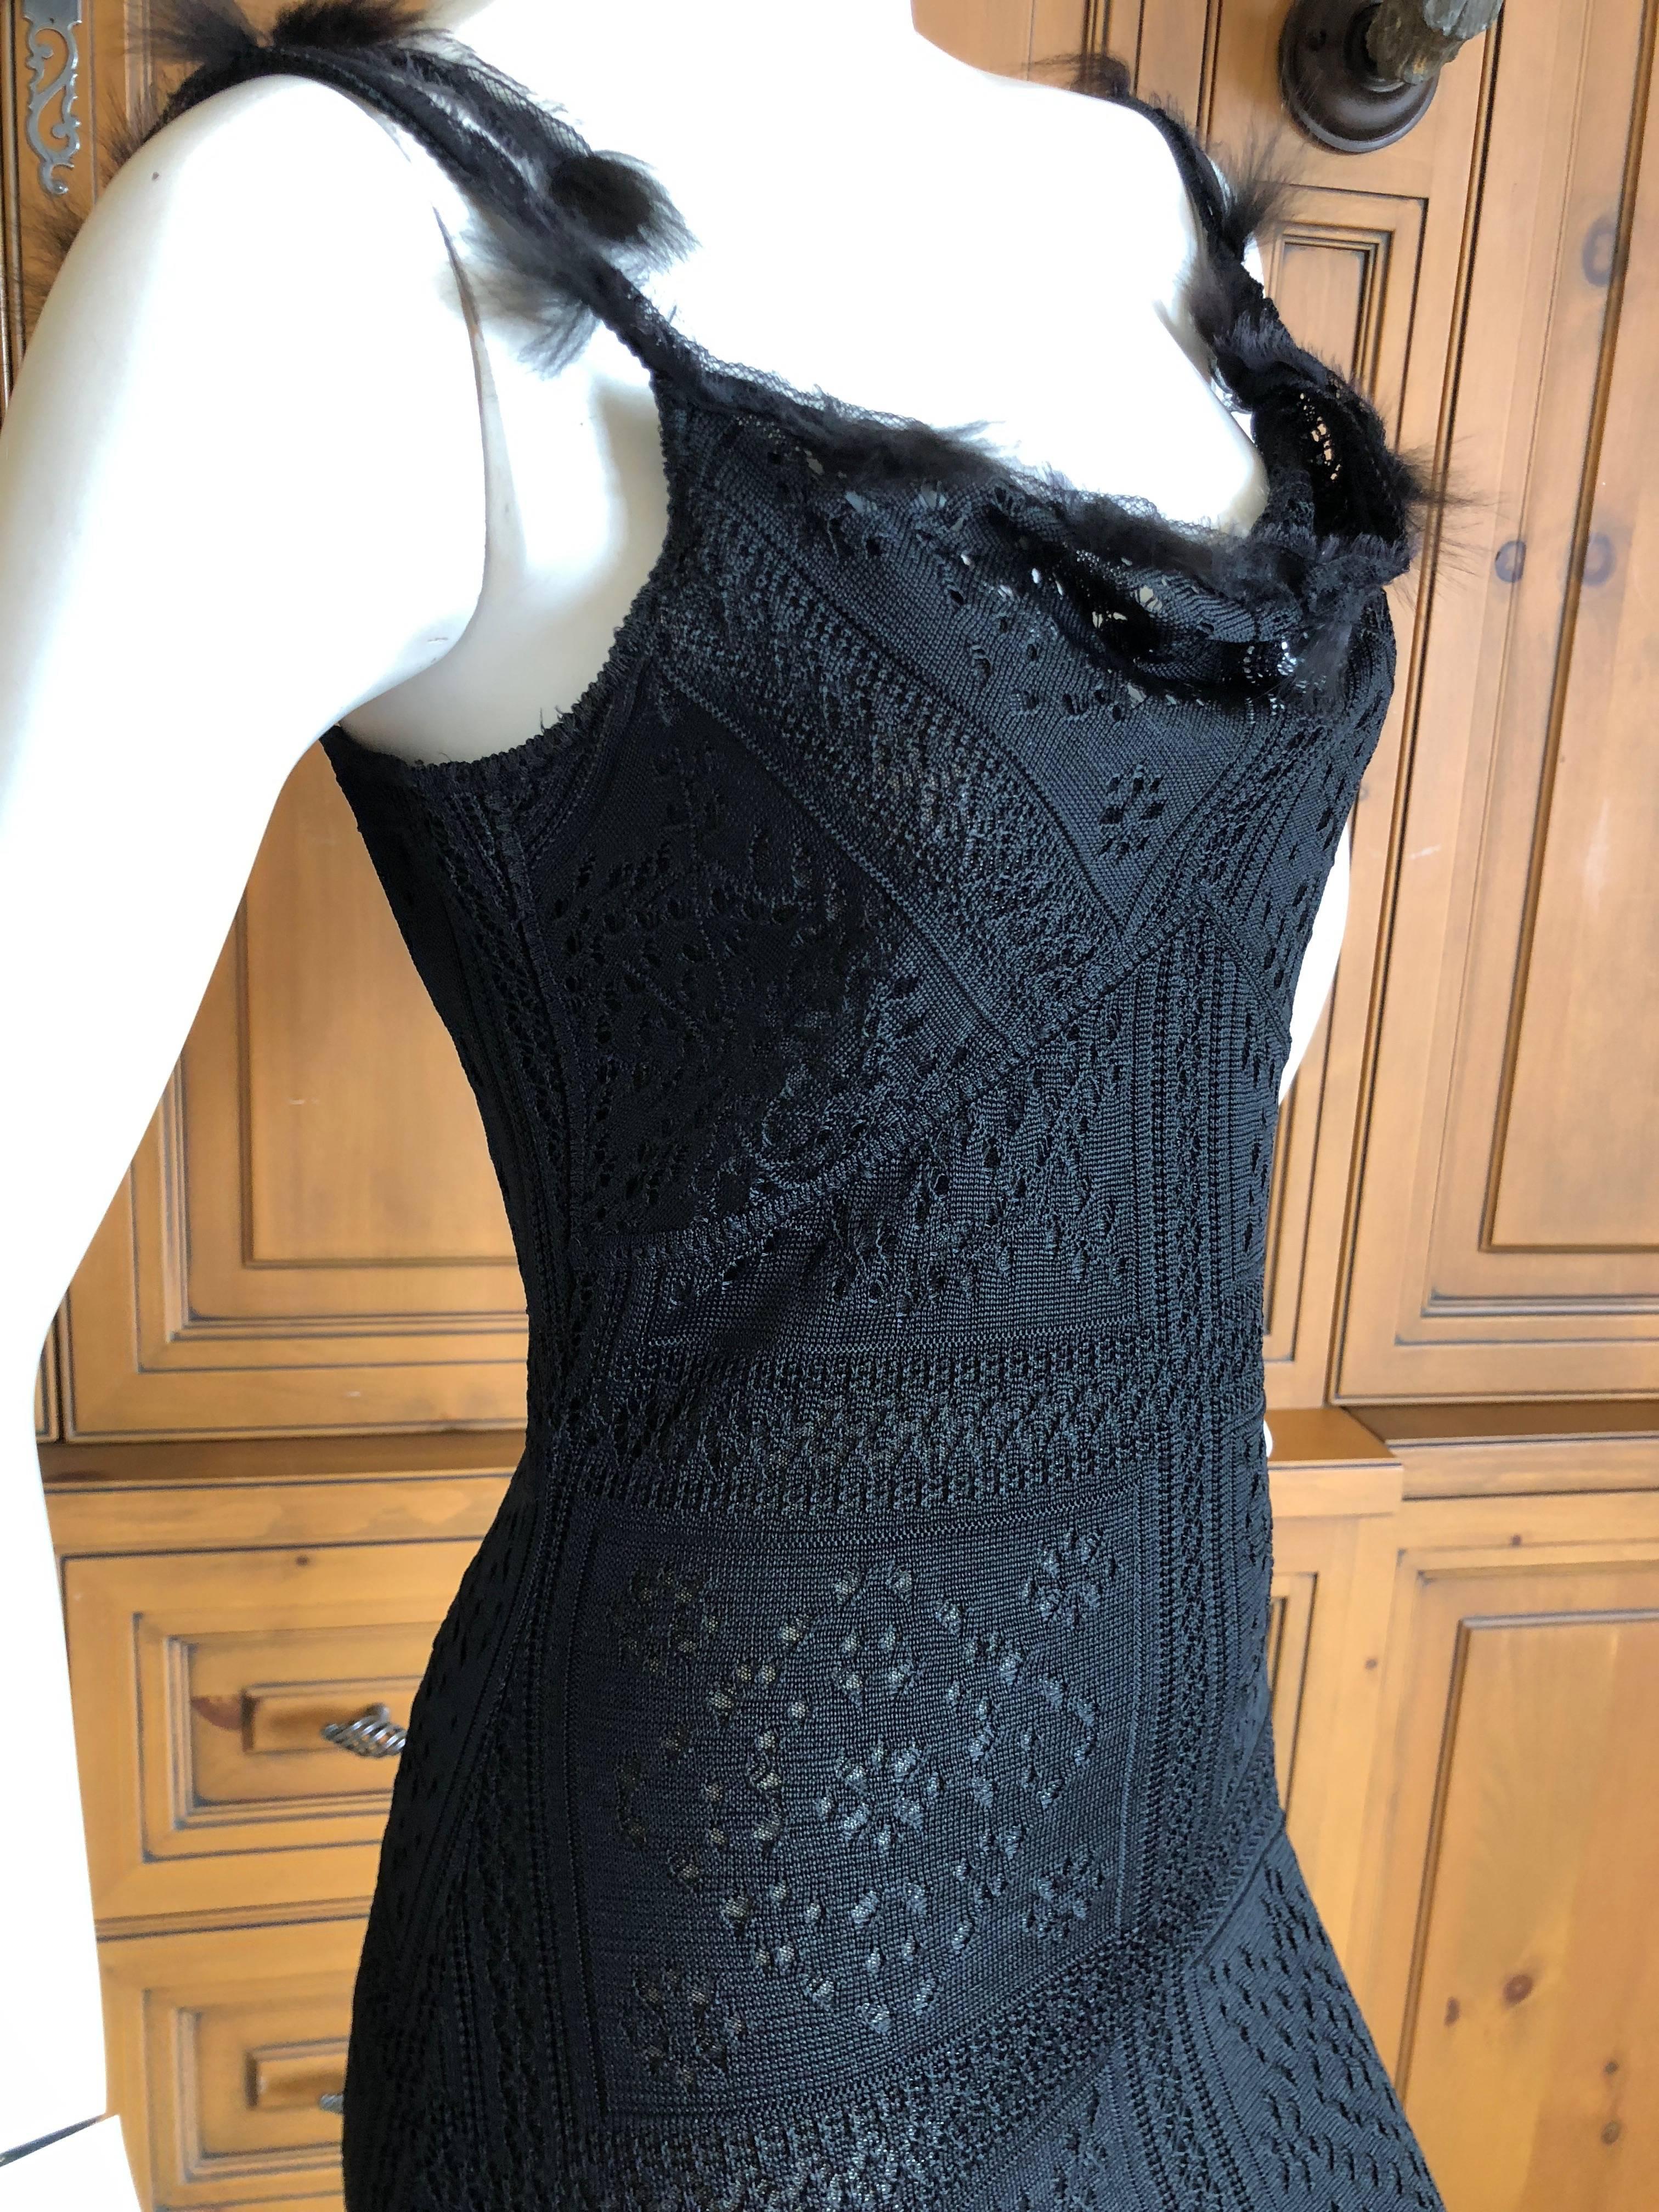 Women's John Galliano Label Sheer Black Knit High Slit Feather Trim Dress, Early 1990s For Sale